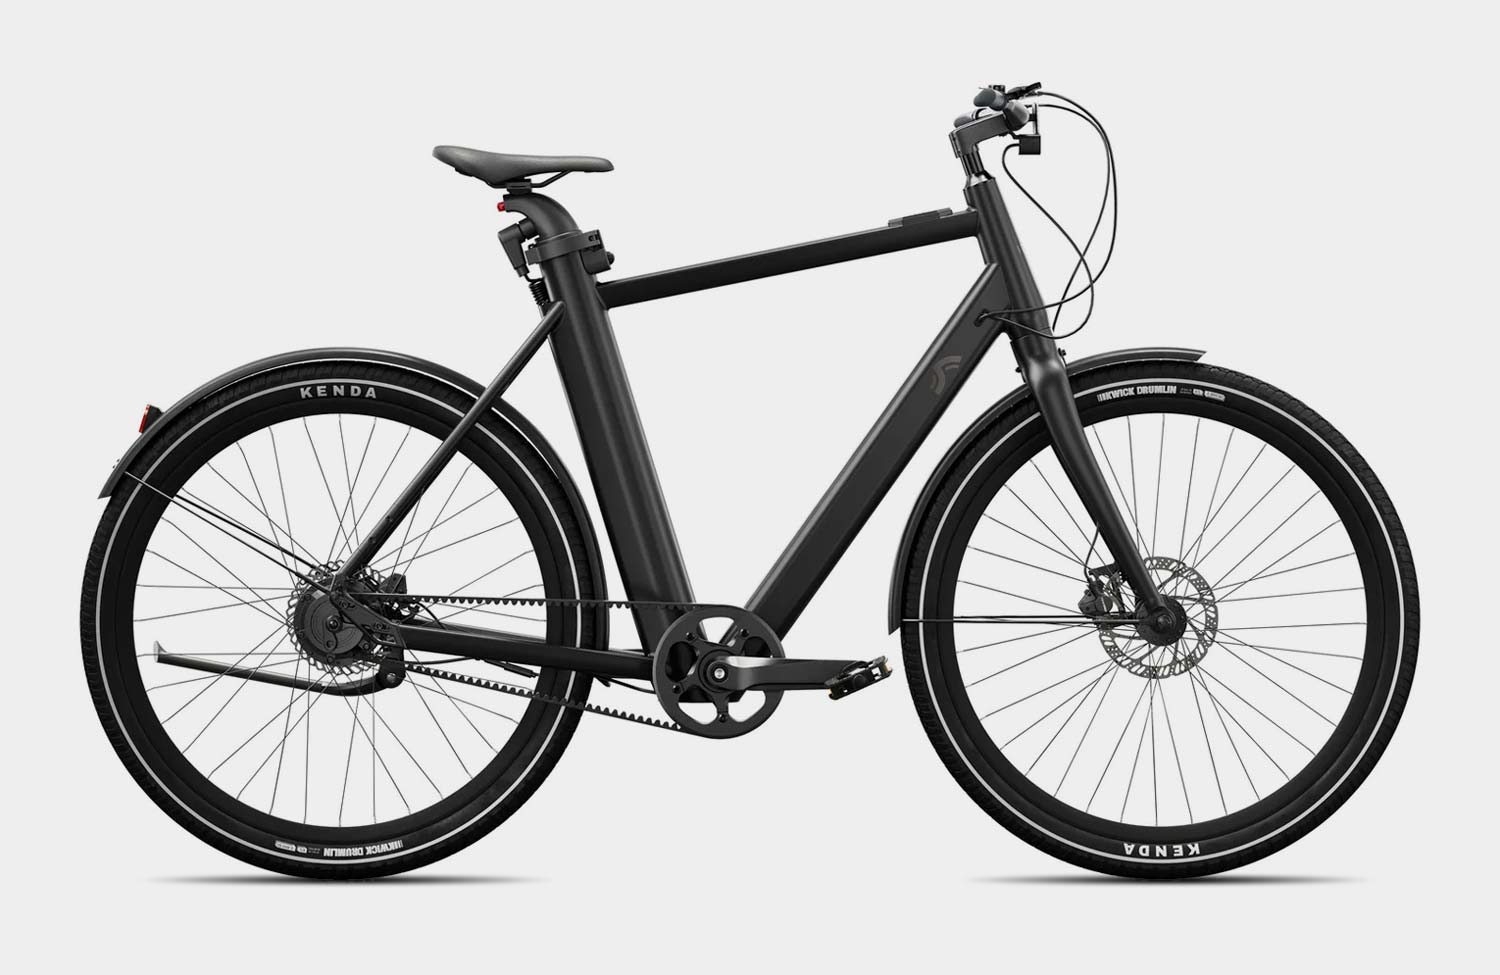 An urban e-bike at discounter: from Lidl from Crivit the we a — new take look the bike